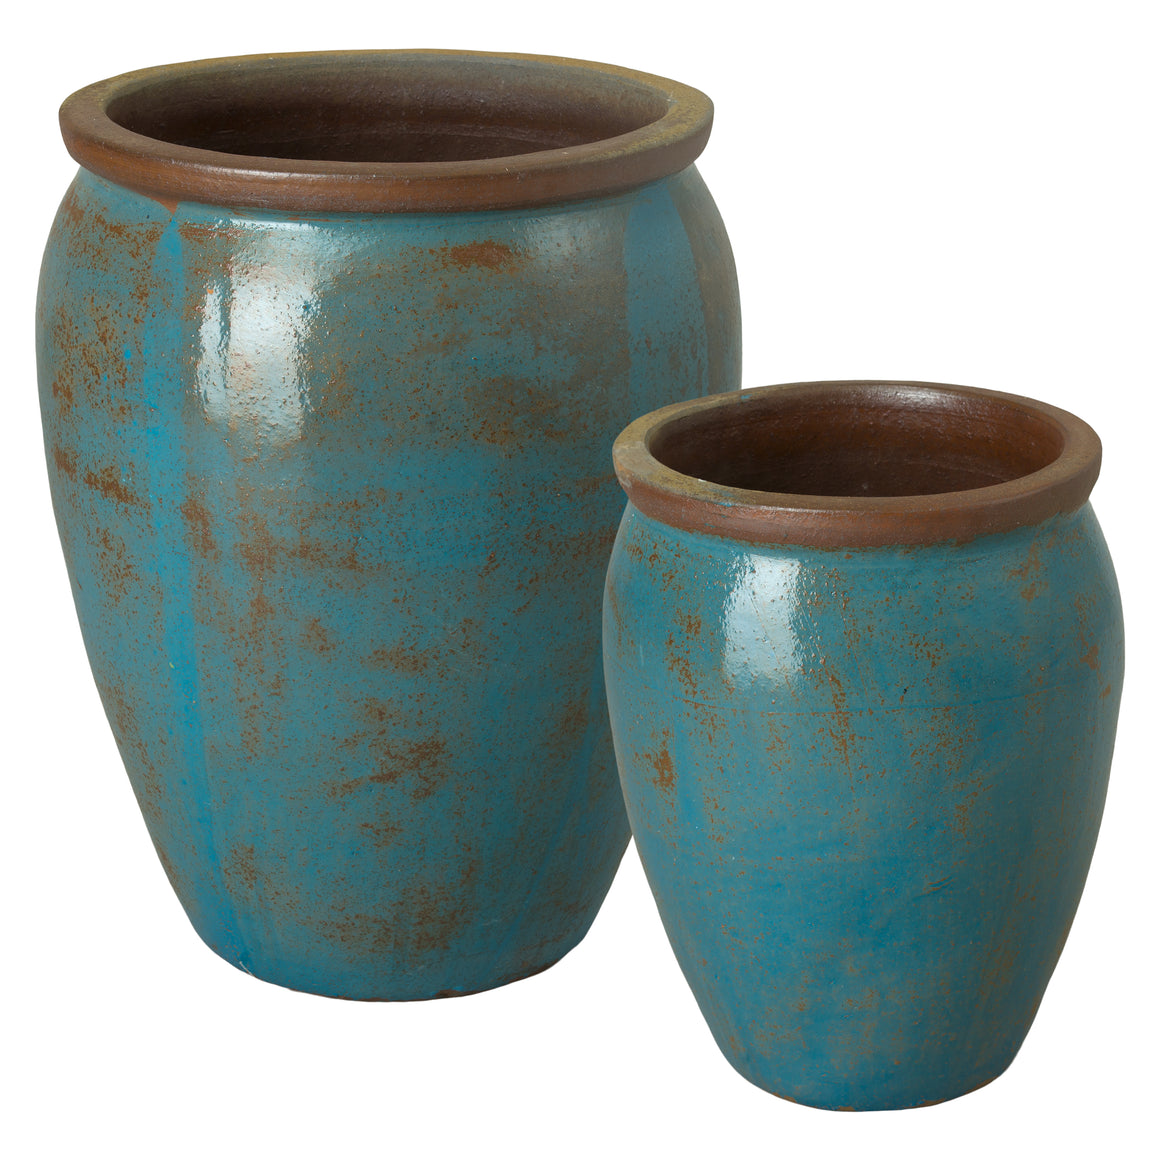 Set of Two Round Ceramic Planters - Rustic Turquoise